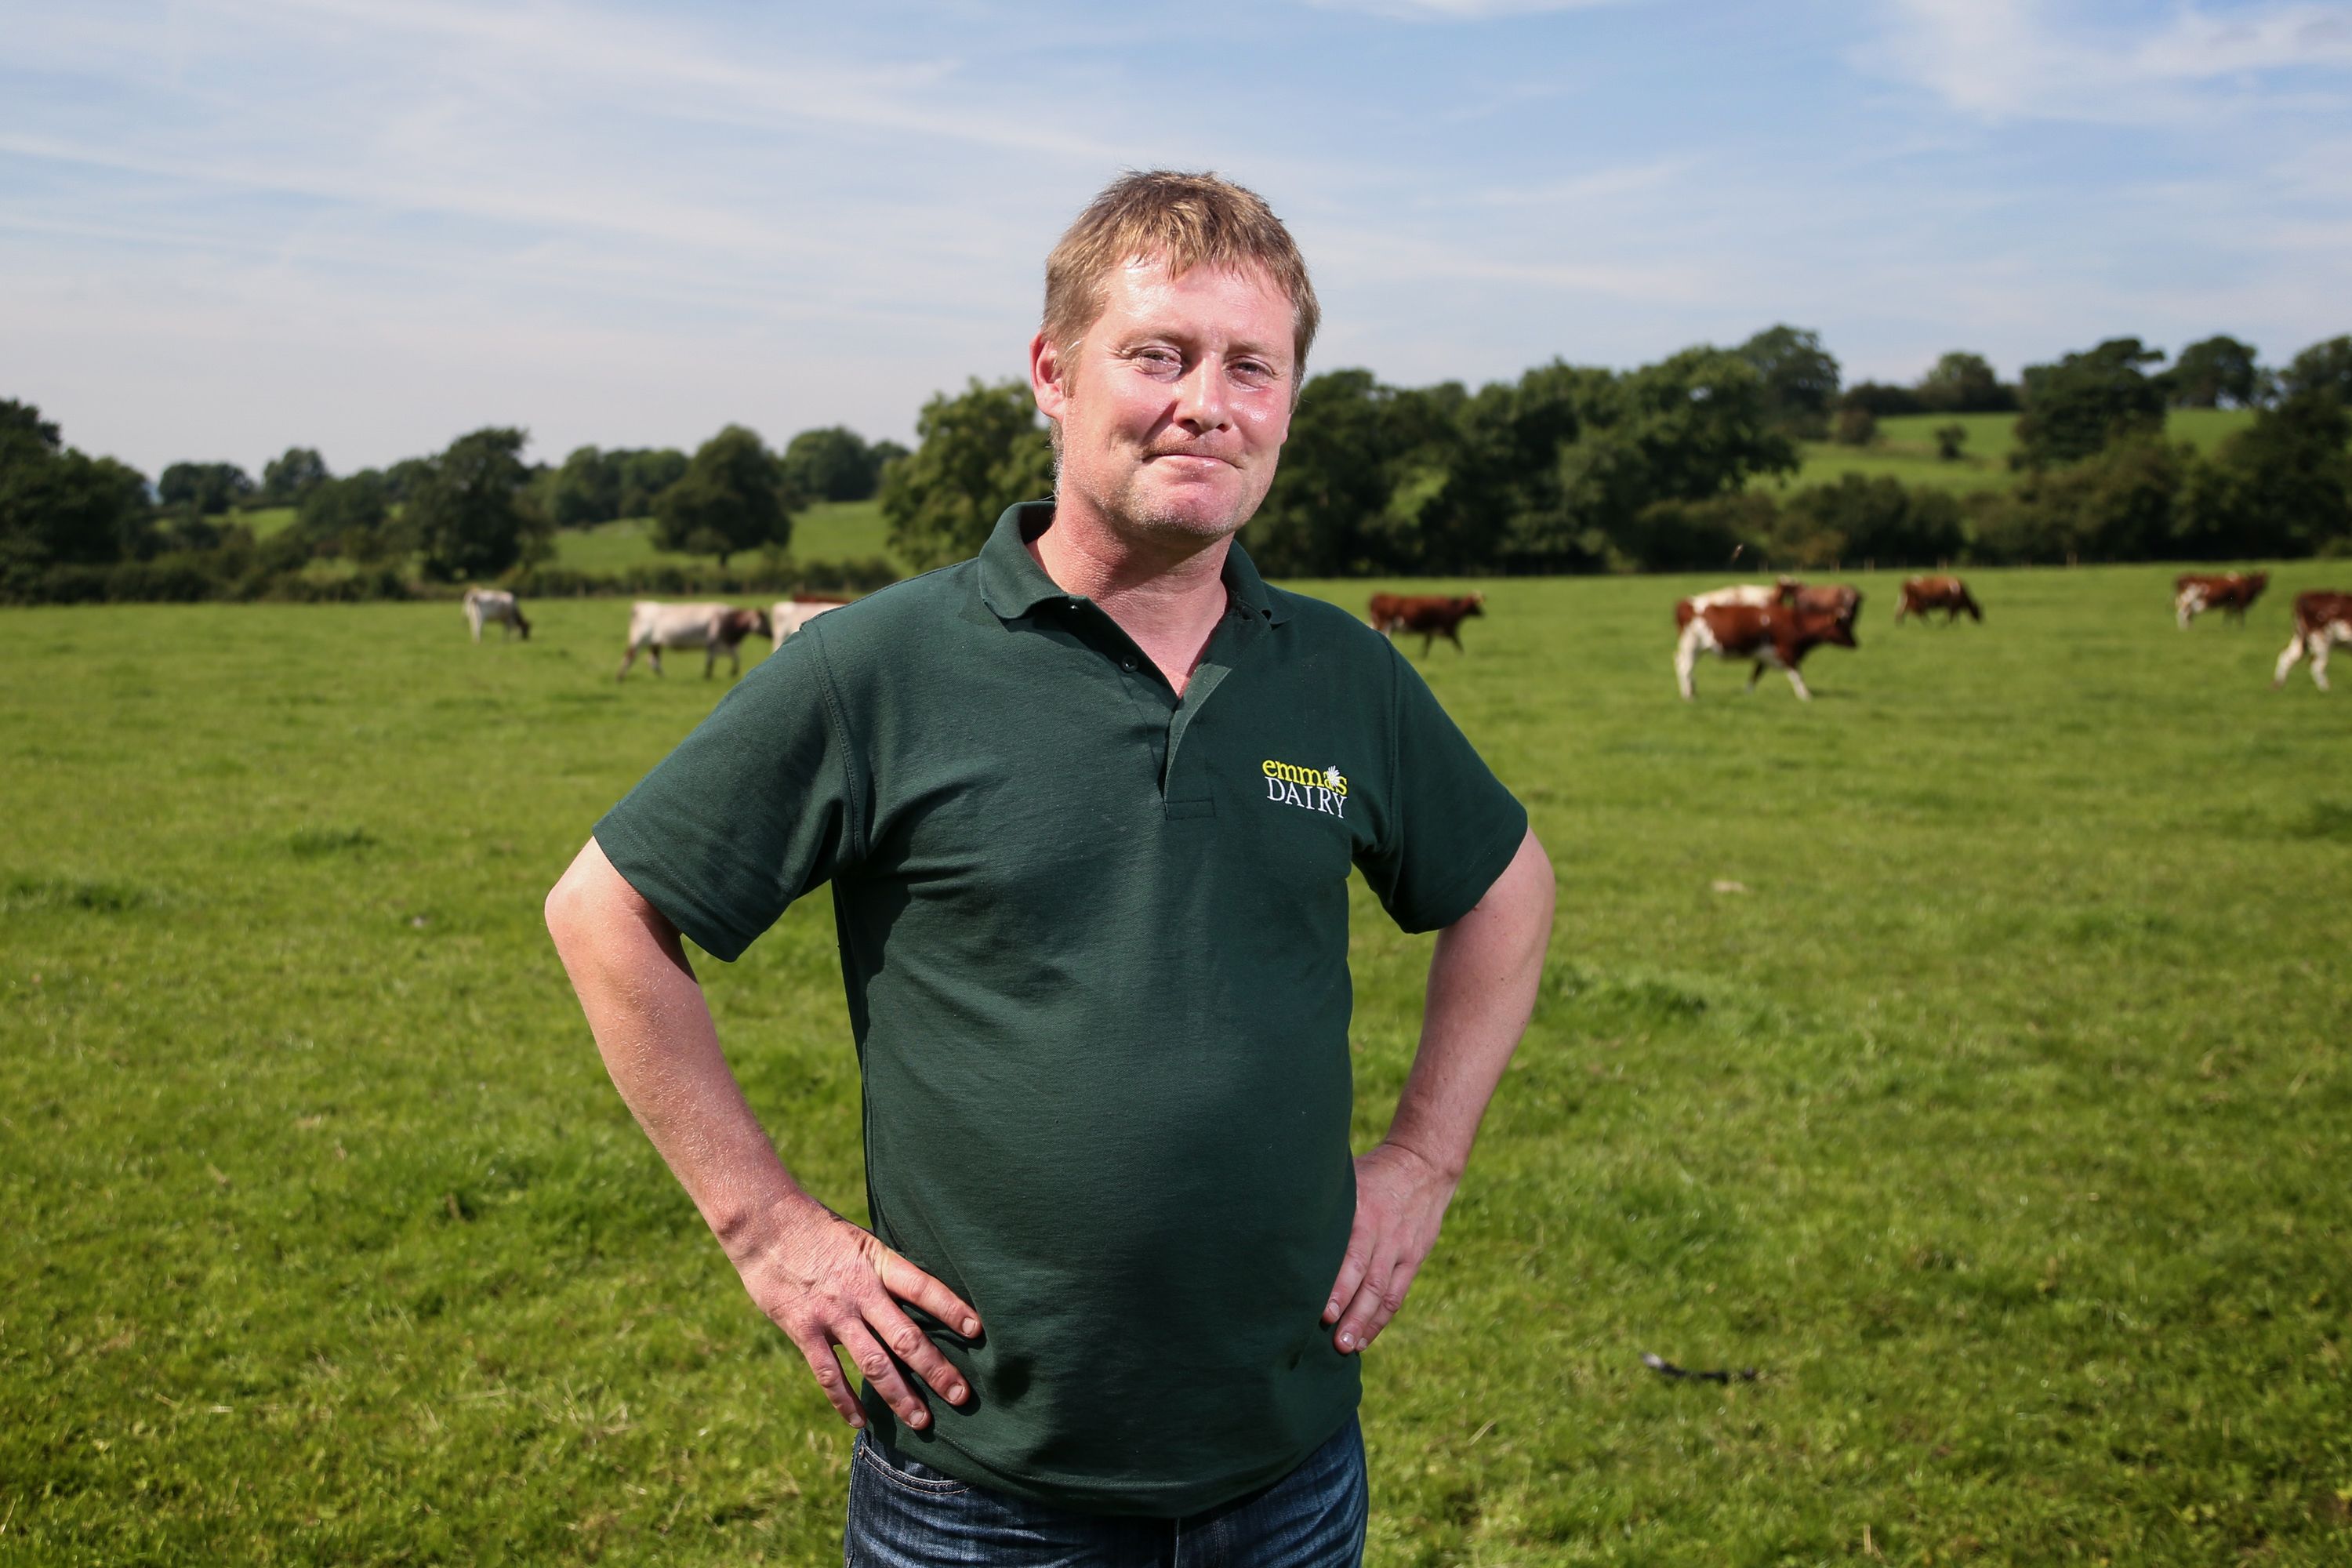 Ian O’Reilly, who farms organically in Lancashire, says times have never been better for organic